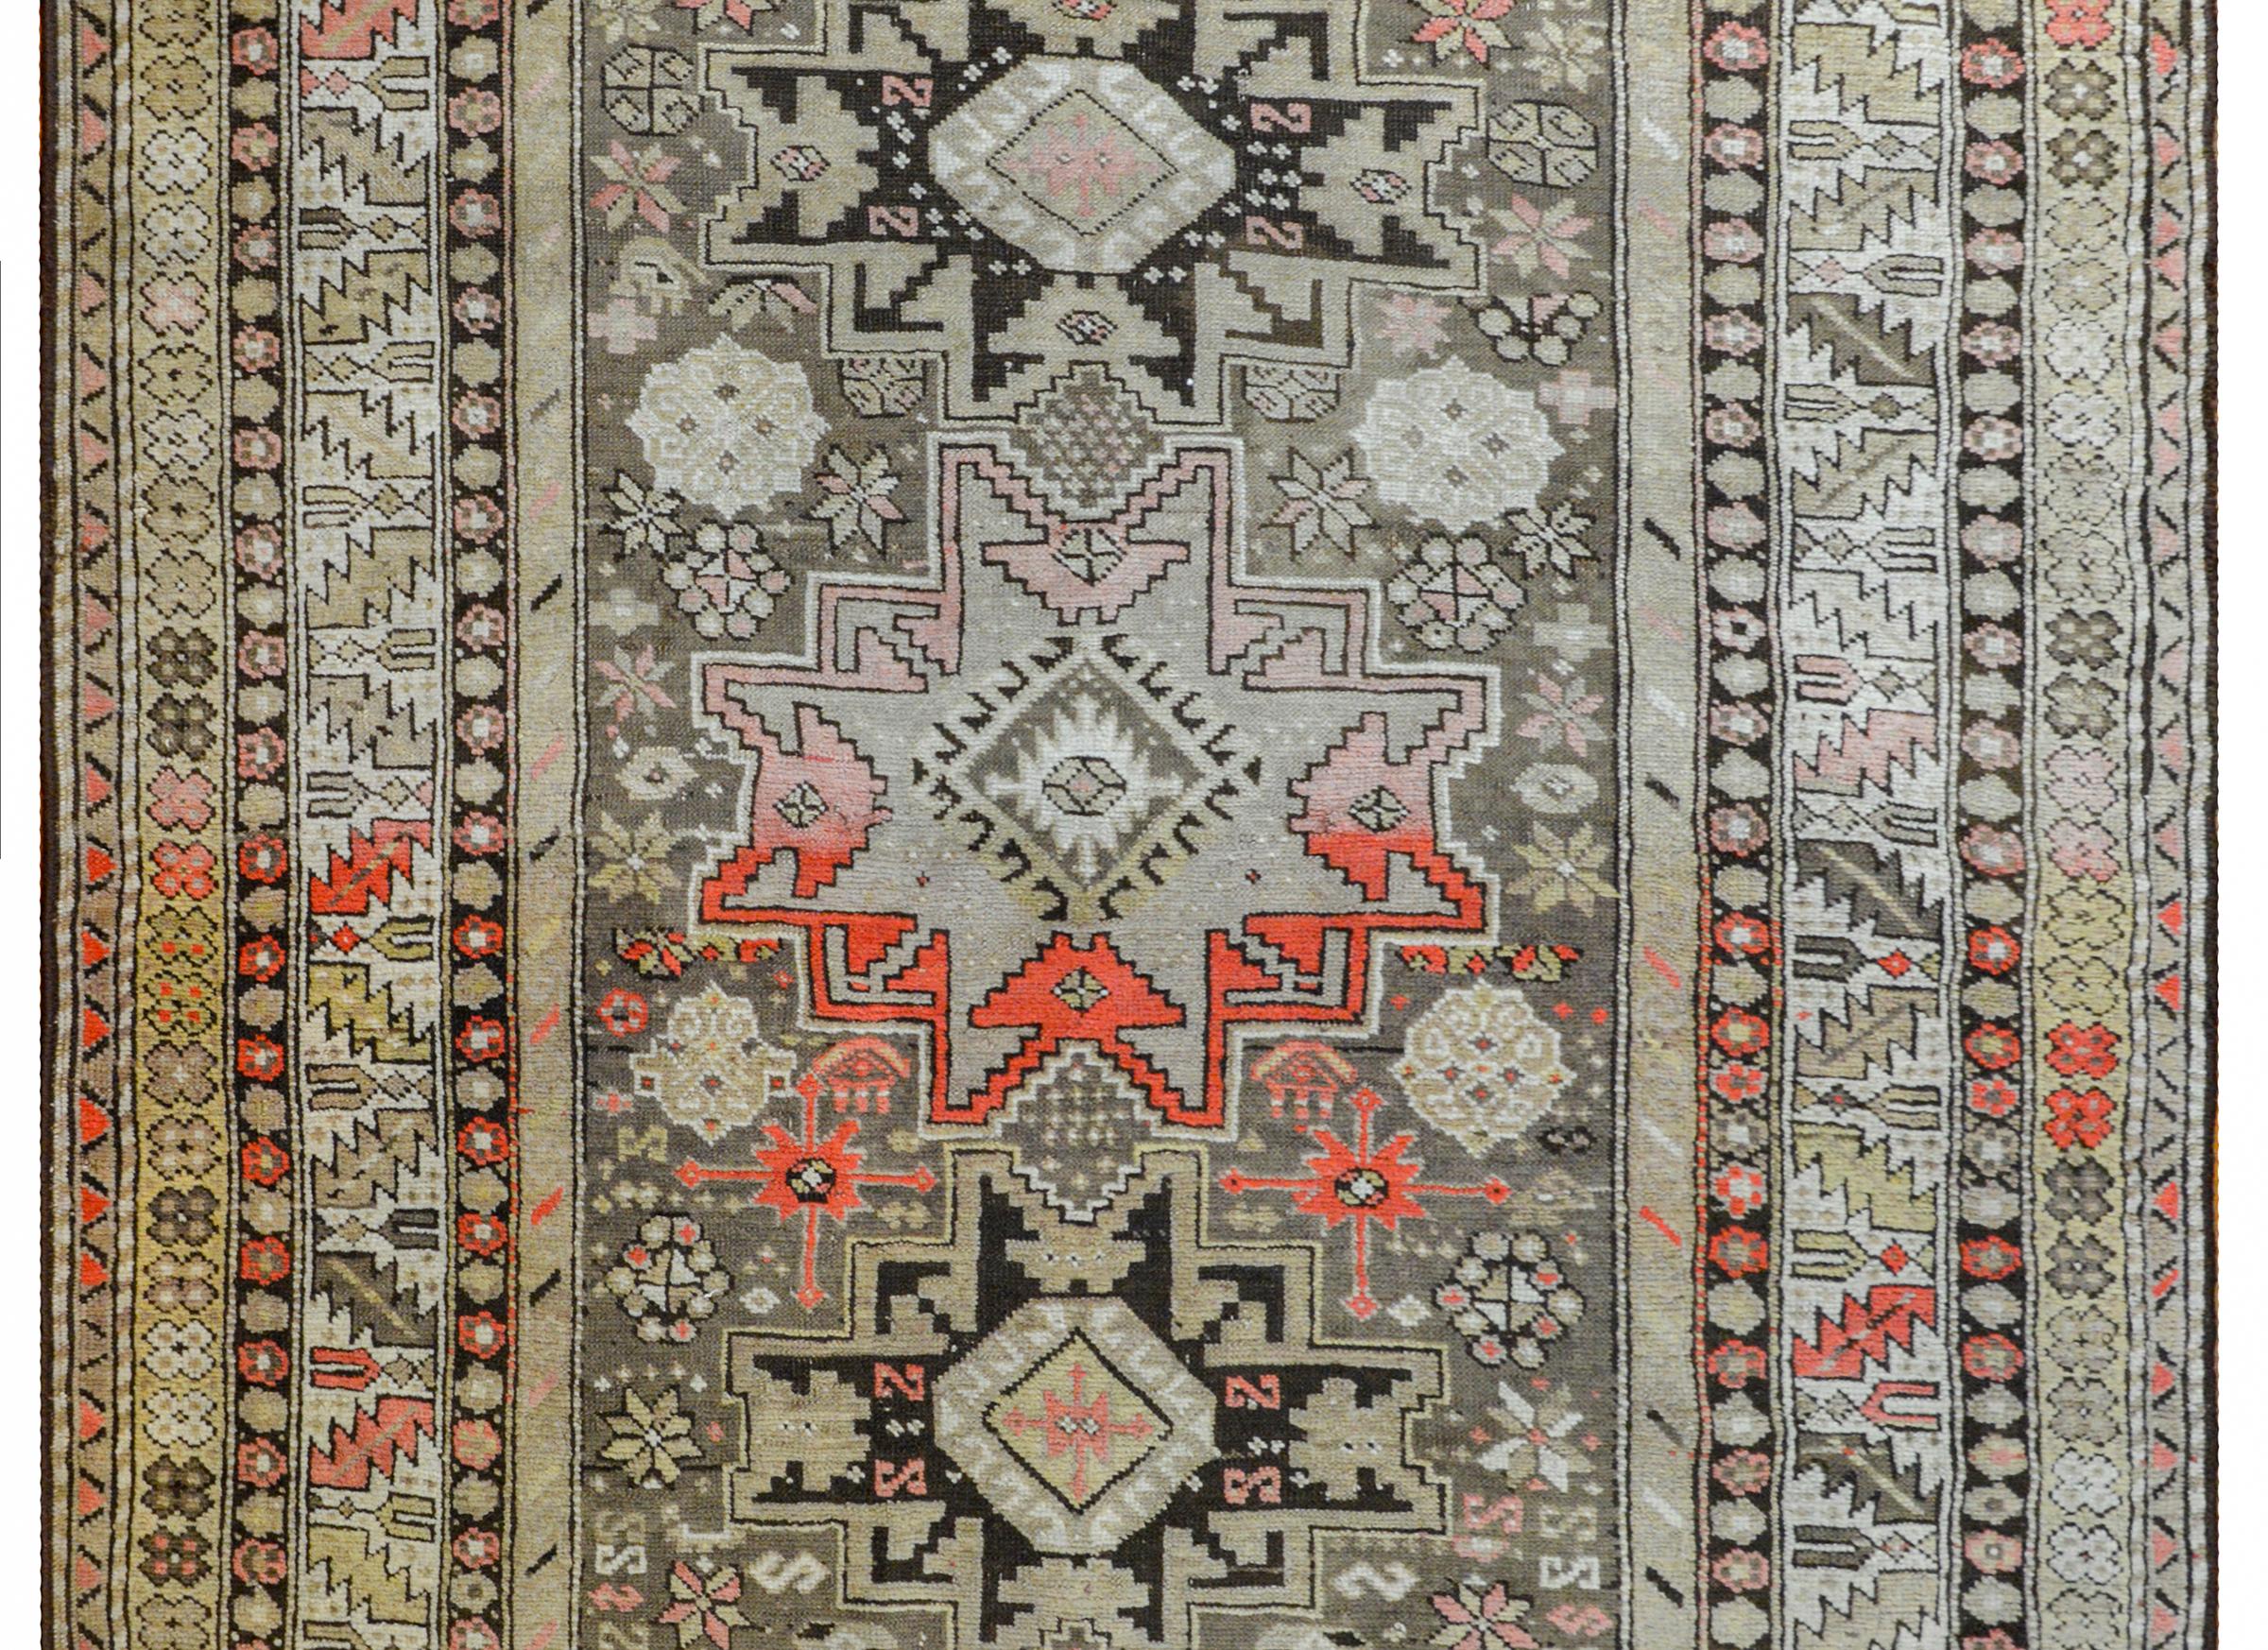 An extraordinary early 20th century Azerbaijani Shirvan rug three large stylized flower medallions amidst a field of more densely woven stylized flowers, all surrounded by myriad floral and geometric patterned stripes and all woven in abrash shades